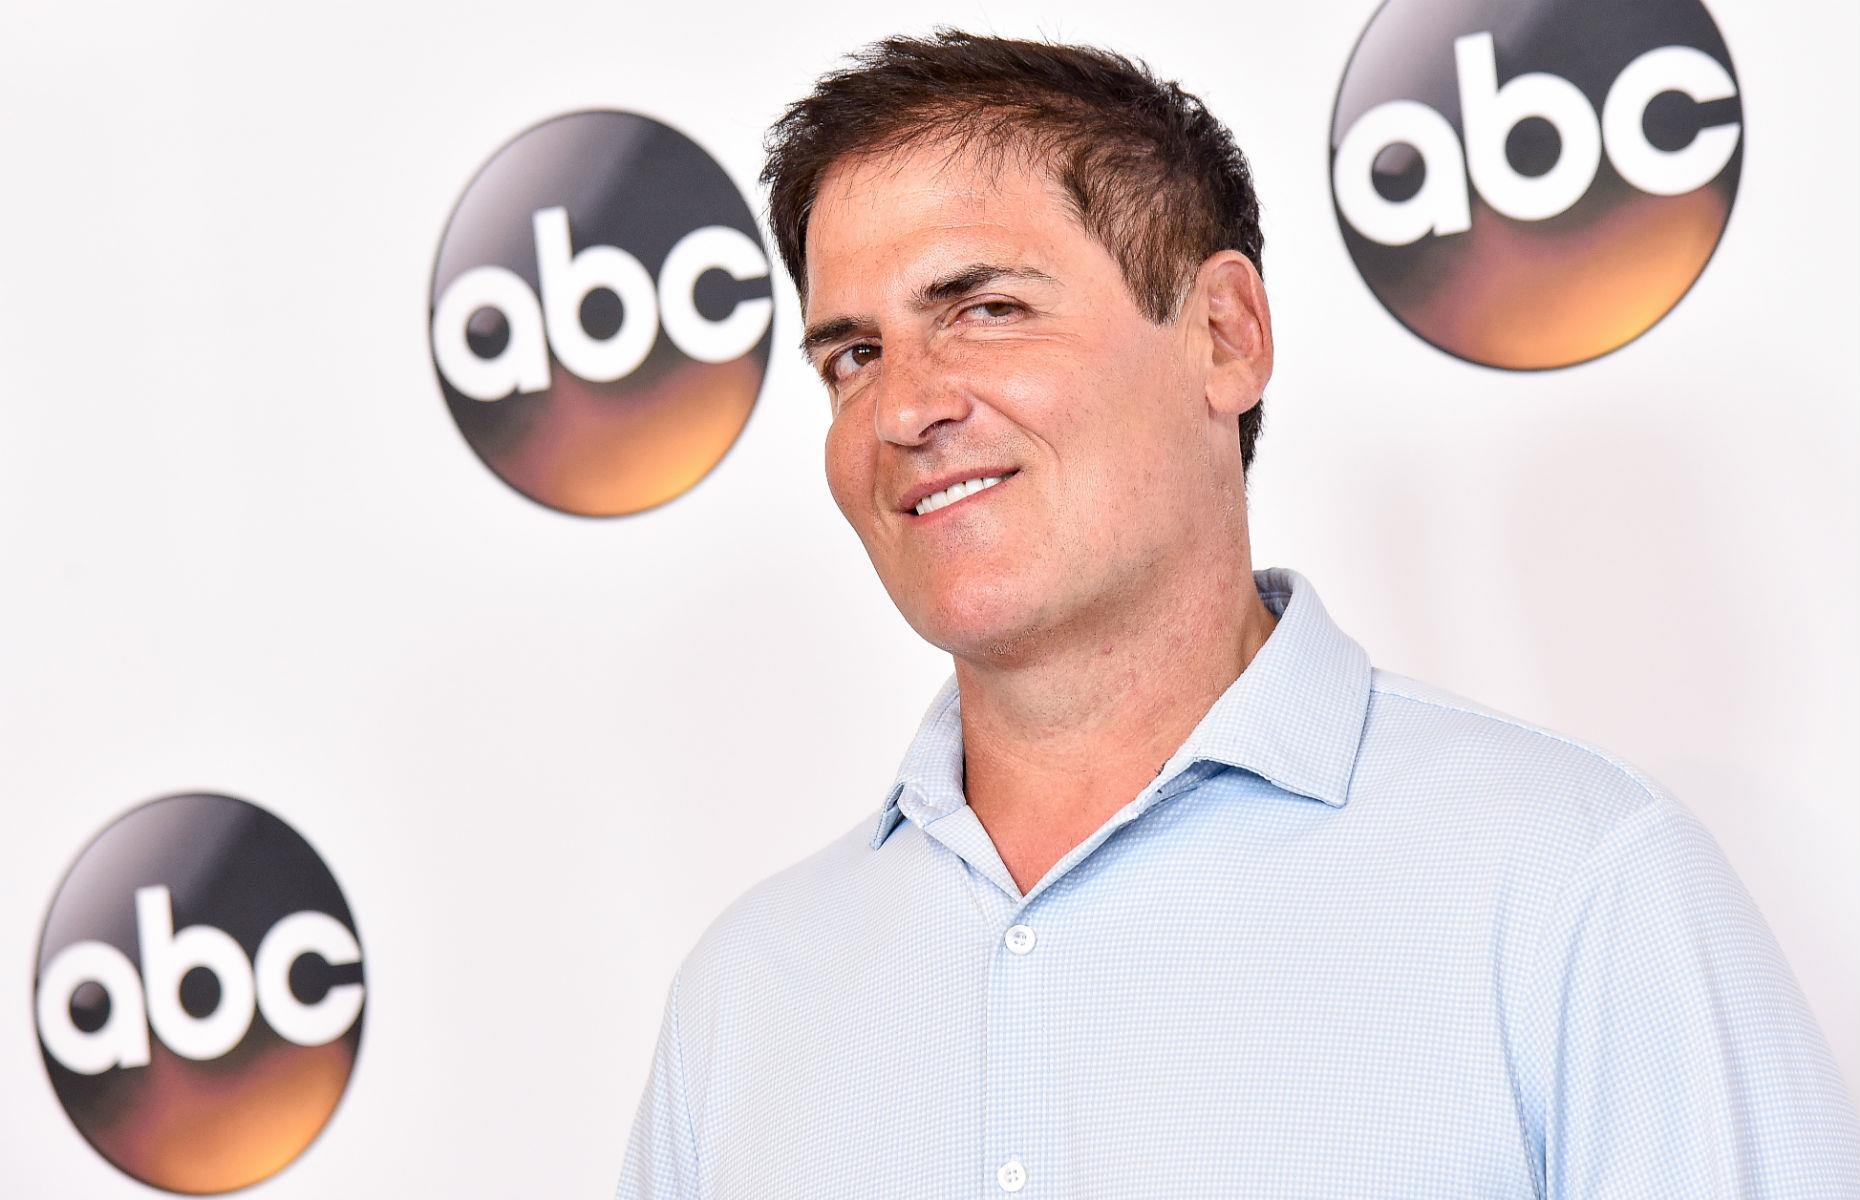 Mark Cuban – There are no shortcuts